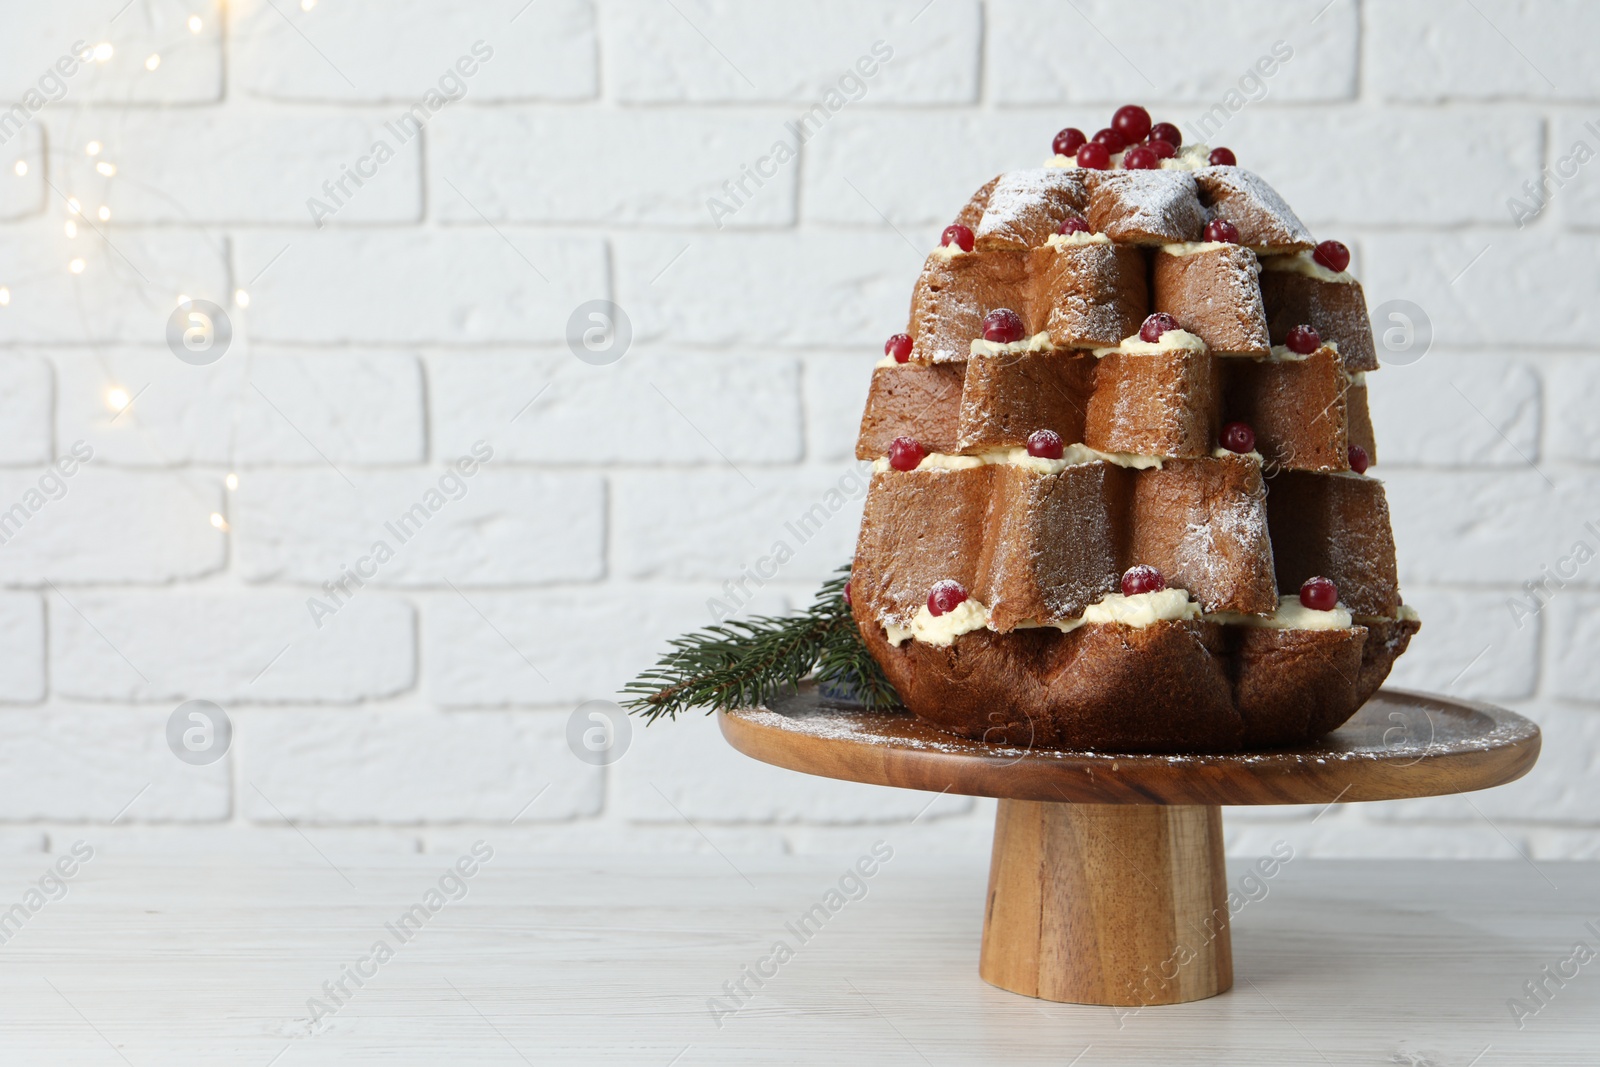 Photo of Delicious Pandoro Christmas tree cake with powdered sugar and berries on white table near brick wall. Space for text